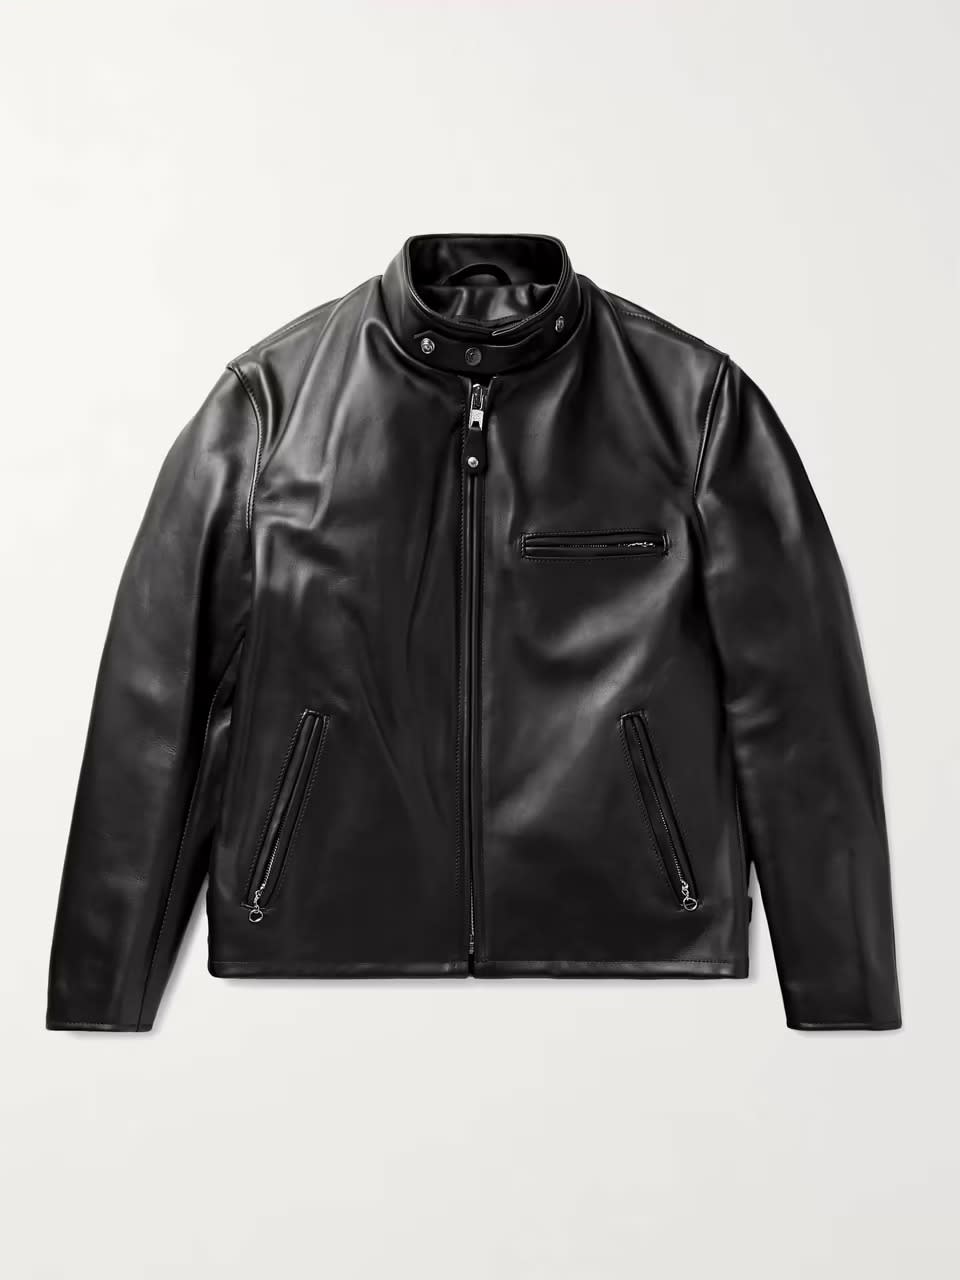 21 Stylish Leather Jackets for Men To Wear in 2022